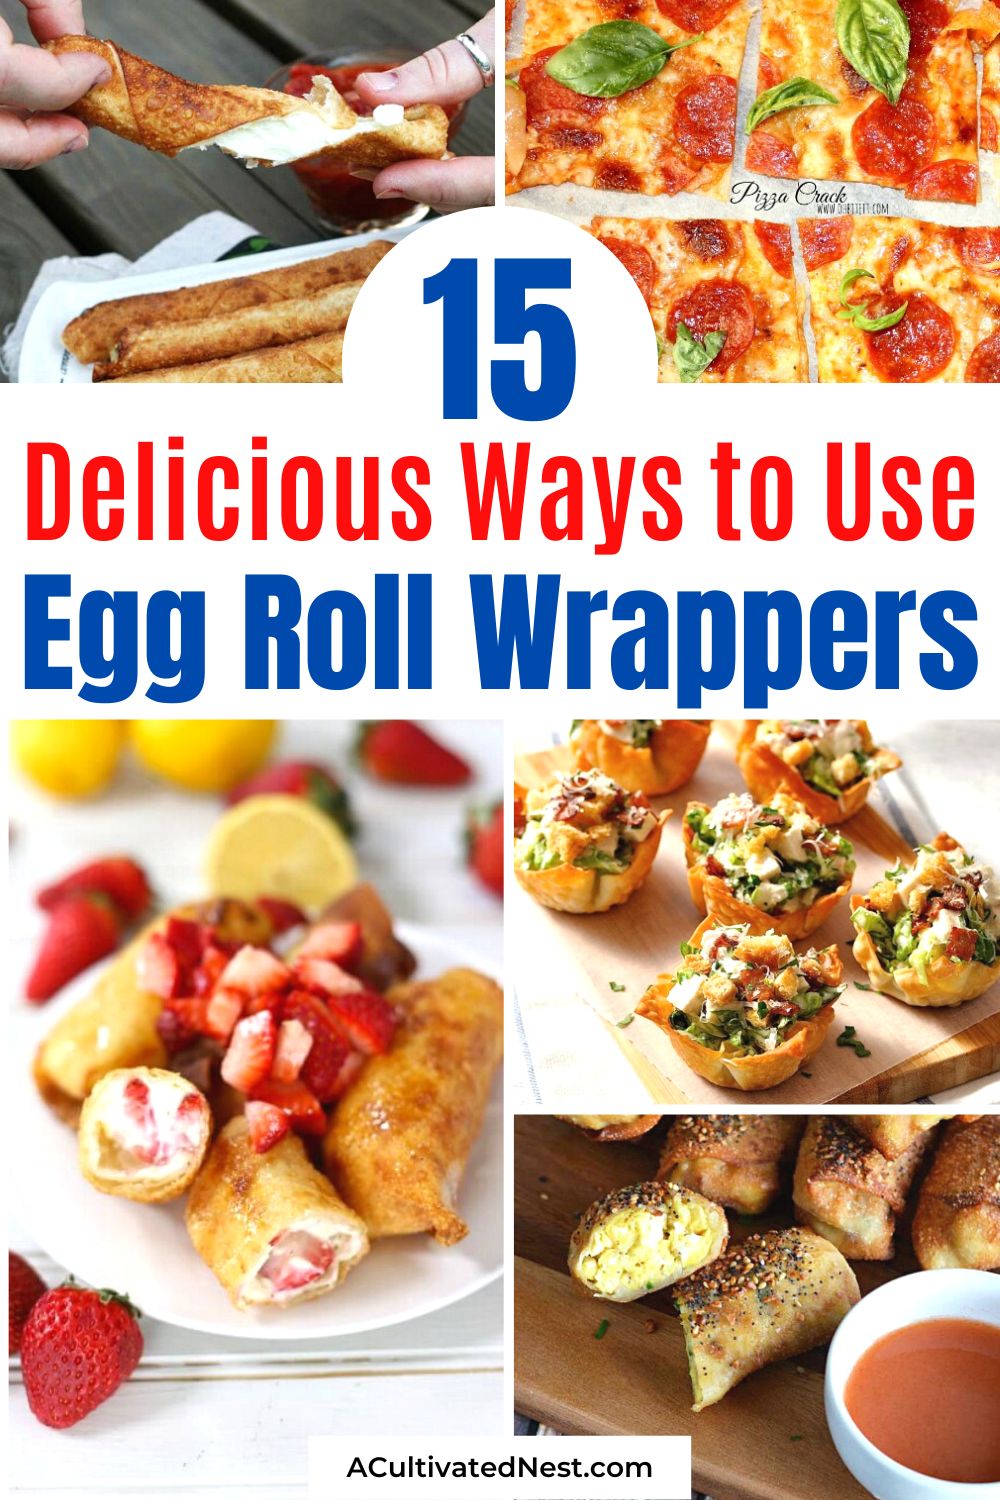 15 Genius Recipes that Use Egg Roll Wrappers- Have a lot of extra egg roll wrappers you need to use up? You're in luck, because there are tons of great recipes that use egg roll wrappers, including entrees and desserts! Check out all these delicious recipe ideas! | #recipeIdeas #dessertRecipes #dinnerRecipes #snackRecipes #ACultivatedNest